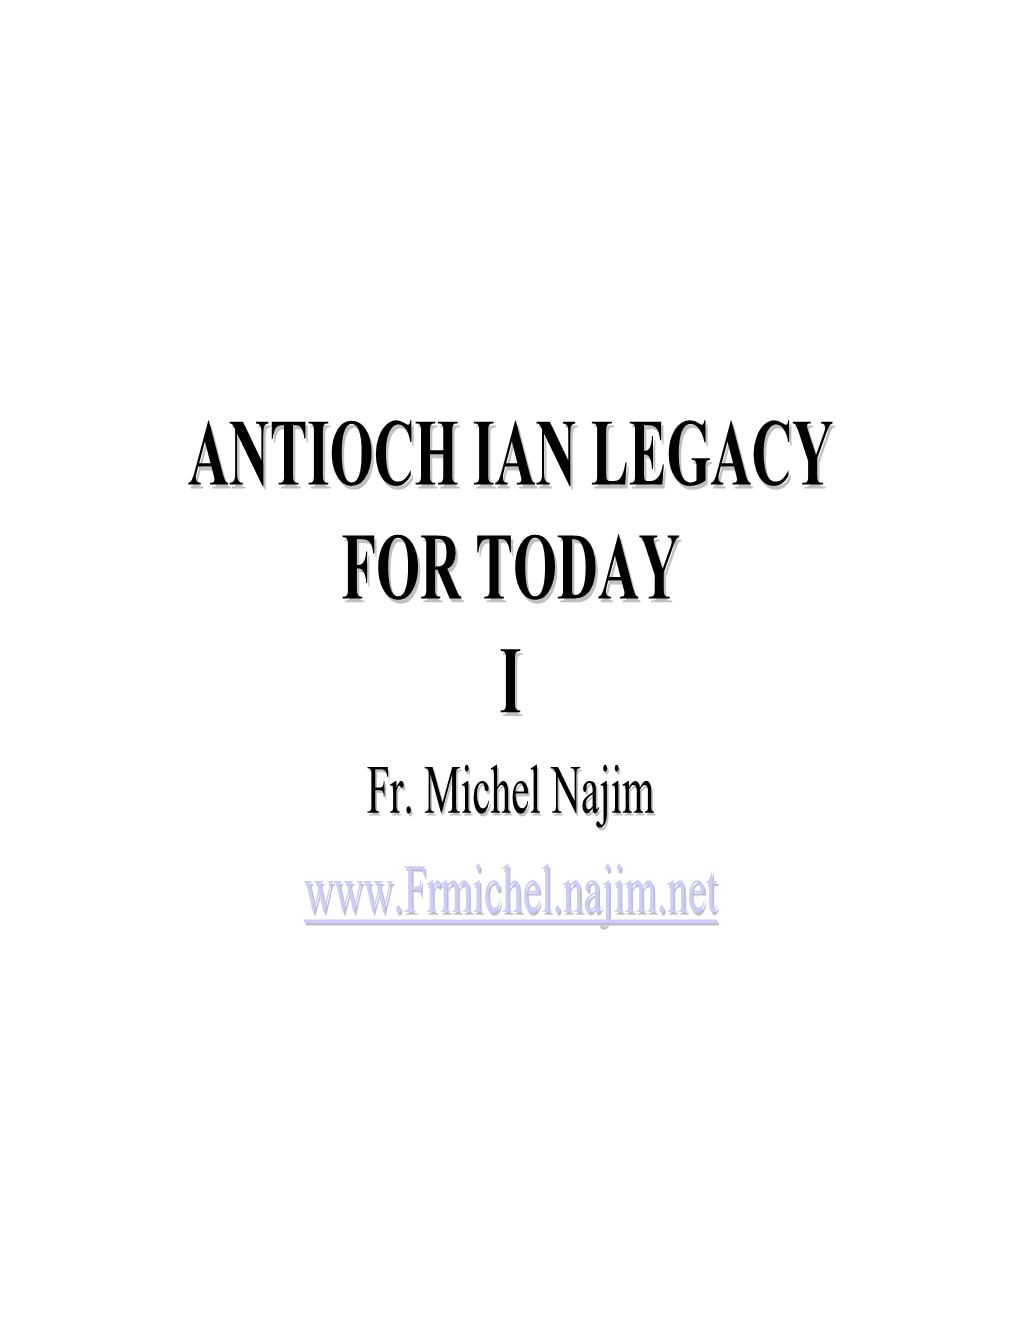 Antioch Ian Legacy for Today I